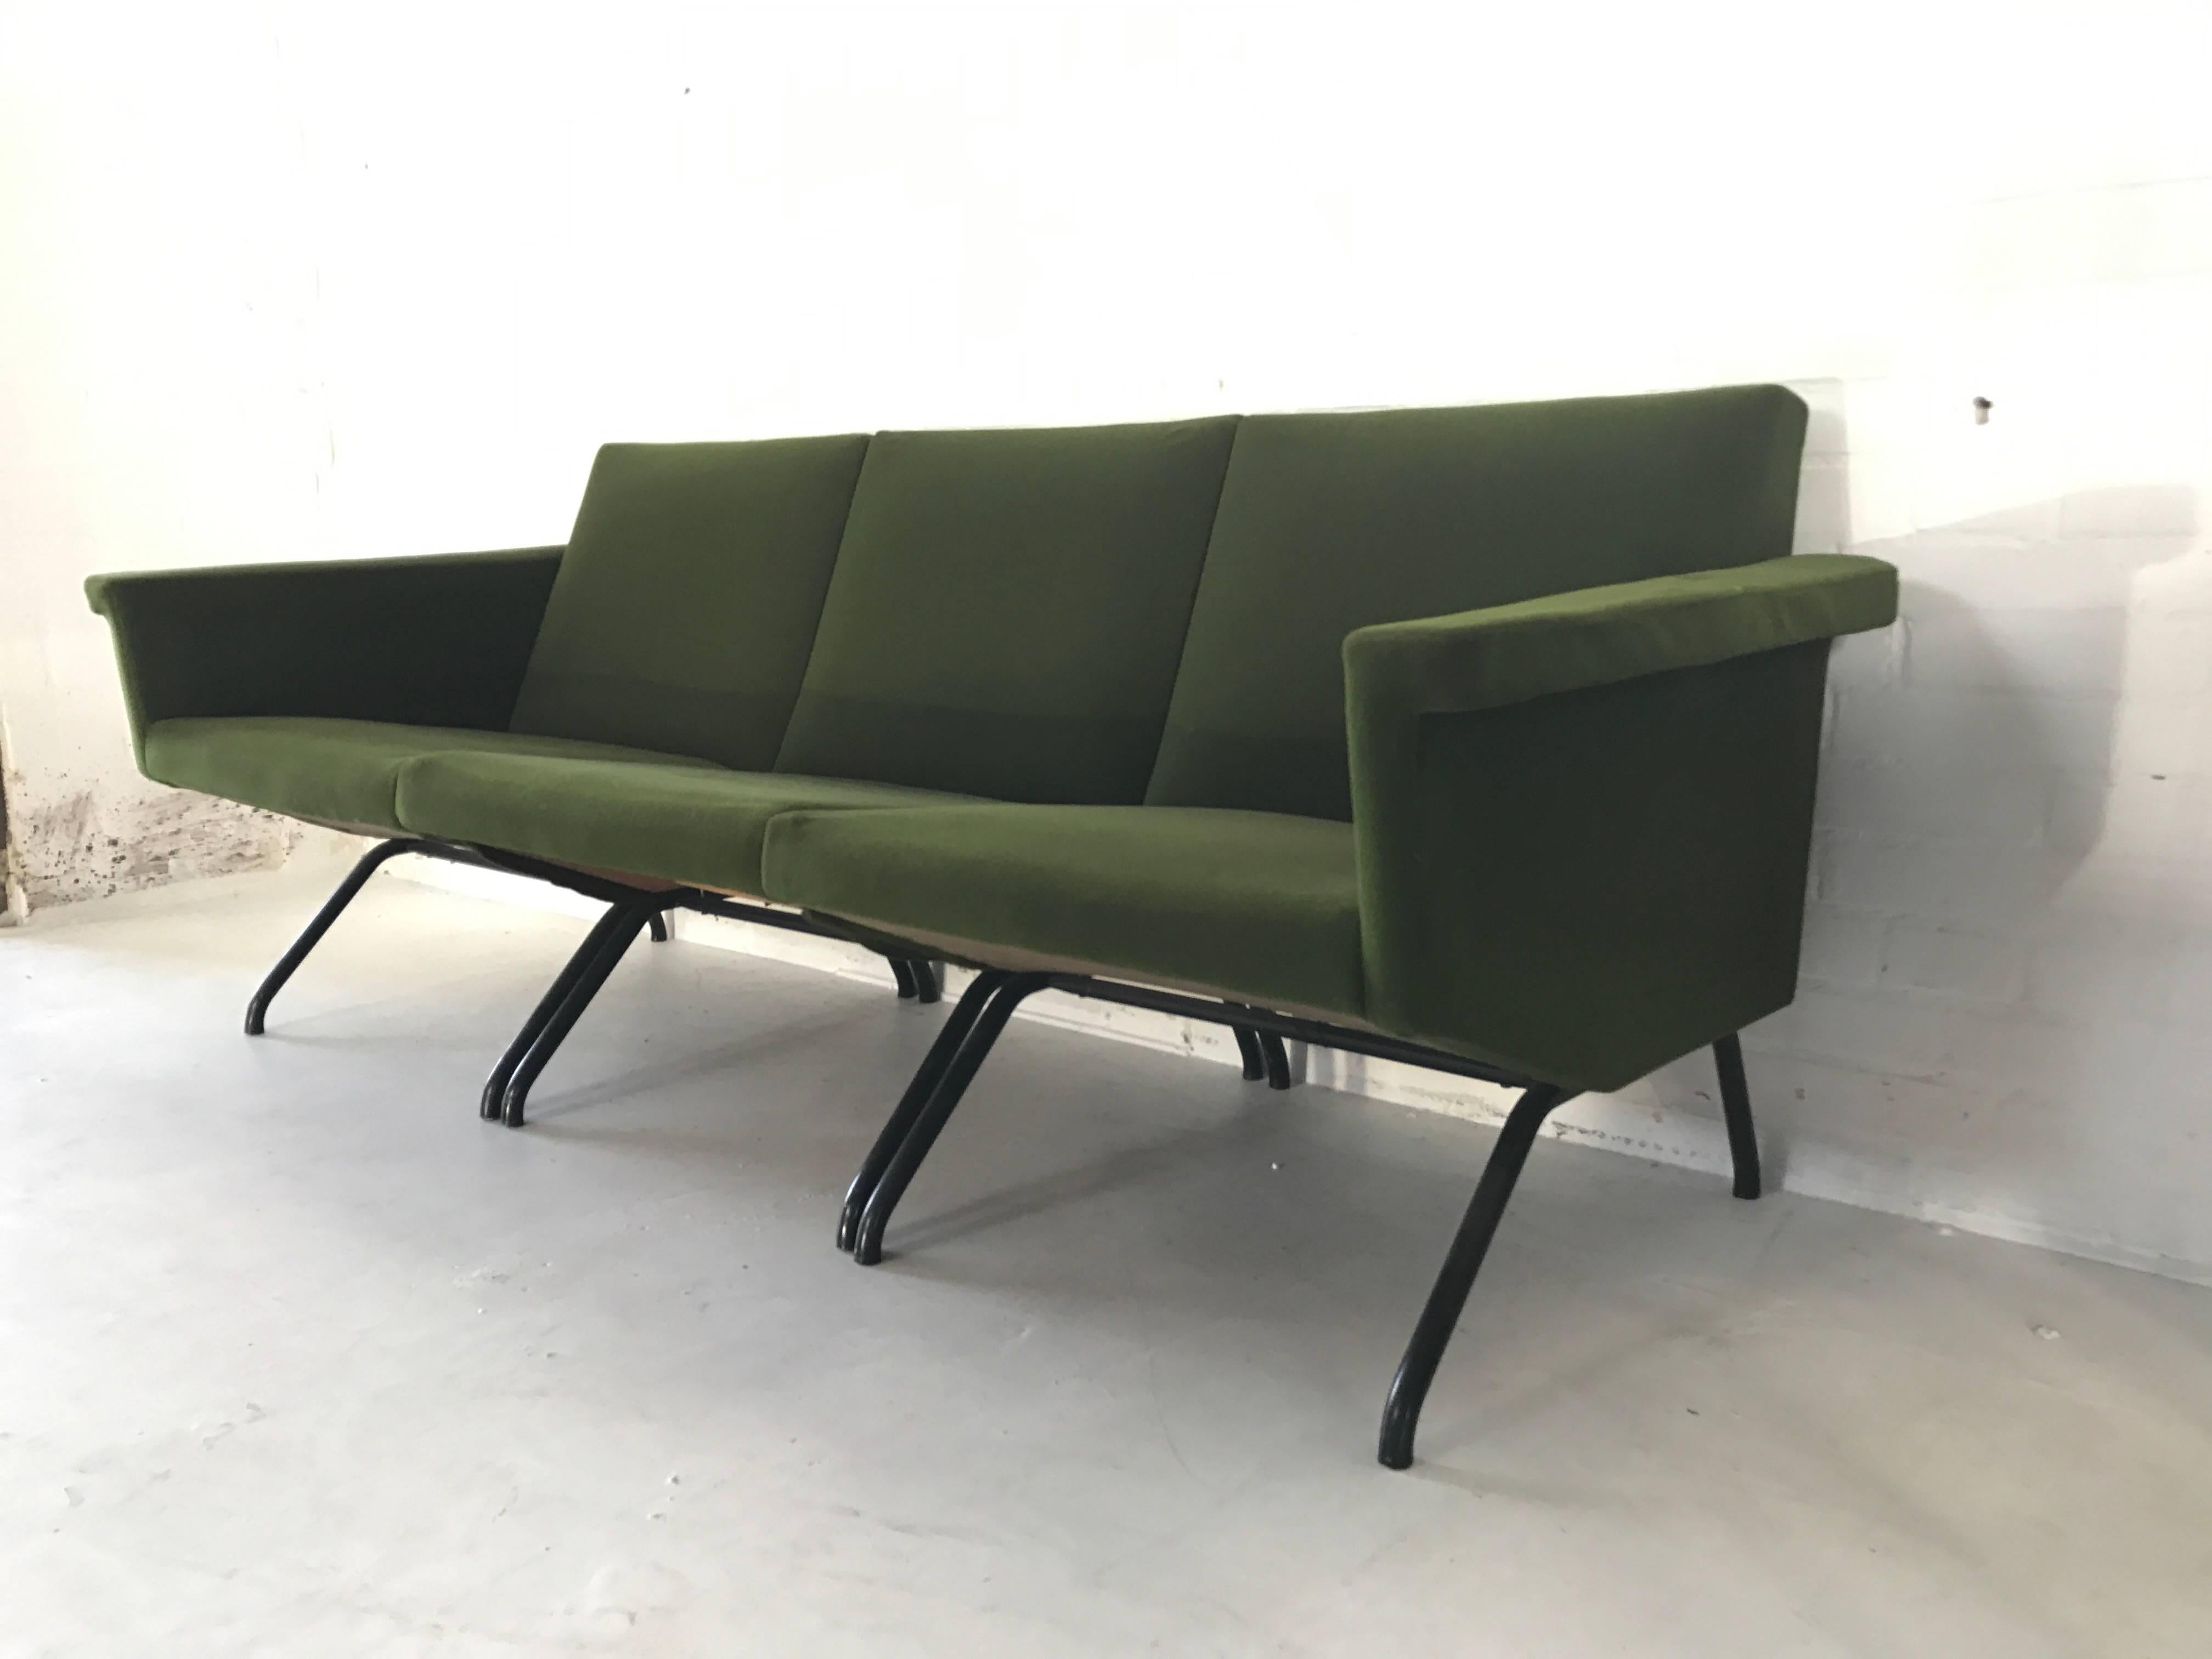 Beautiful segmented sofa designed by famous French designer Pierre Guariche manufactured by Meurop.
Really rare piece completed in its original upholstery.
Black steel base with beautiful forest green fabric.